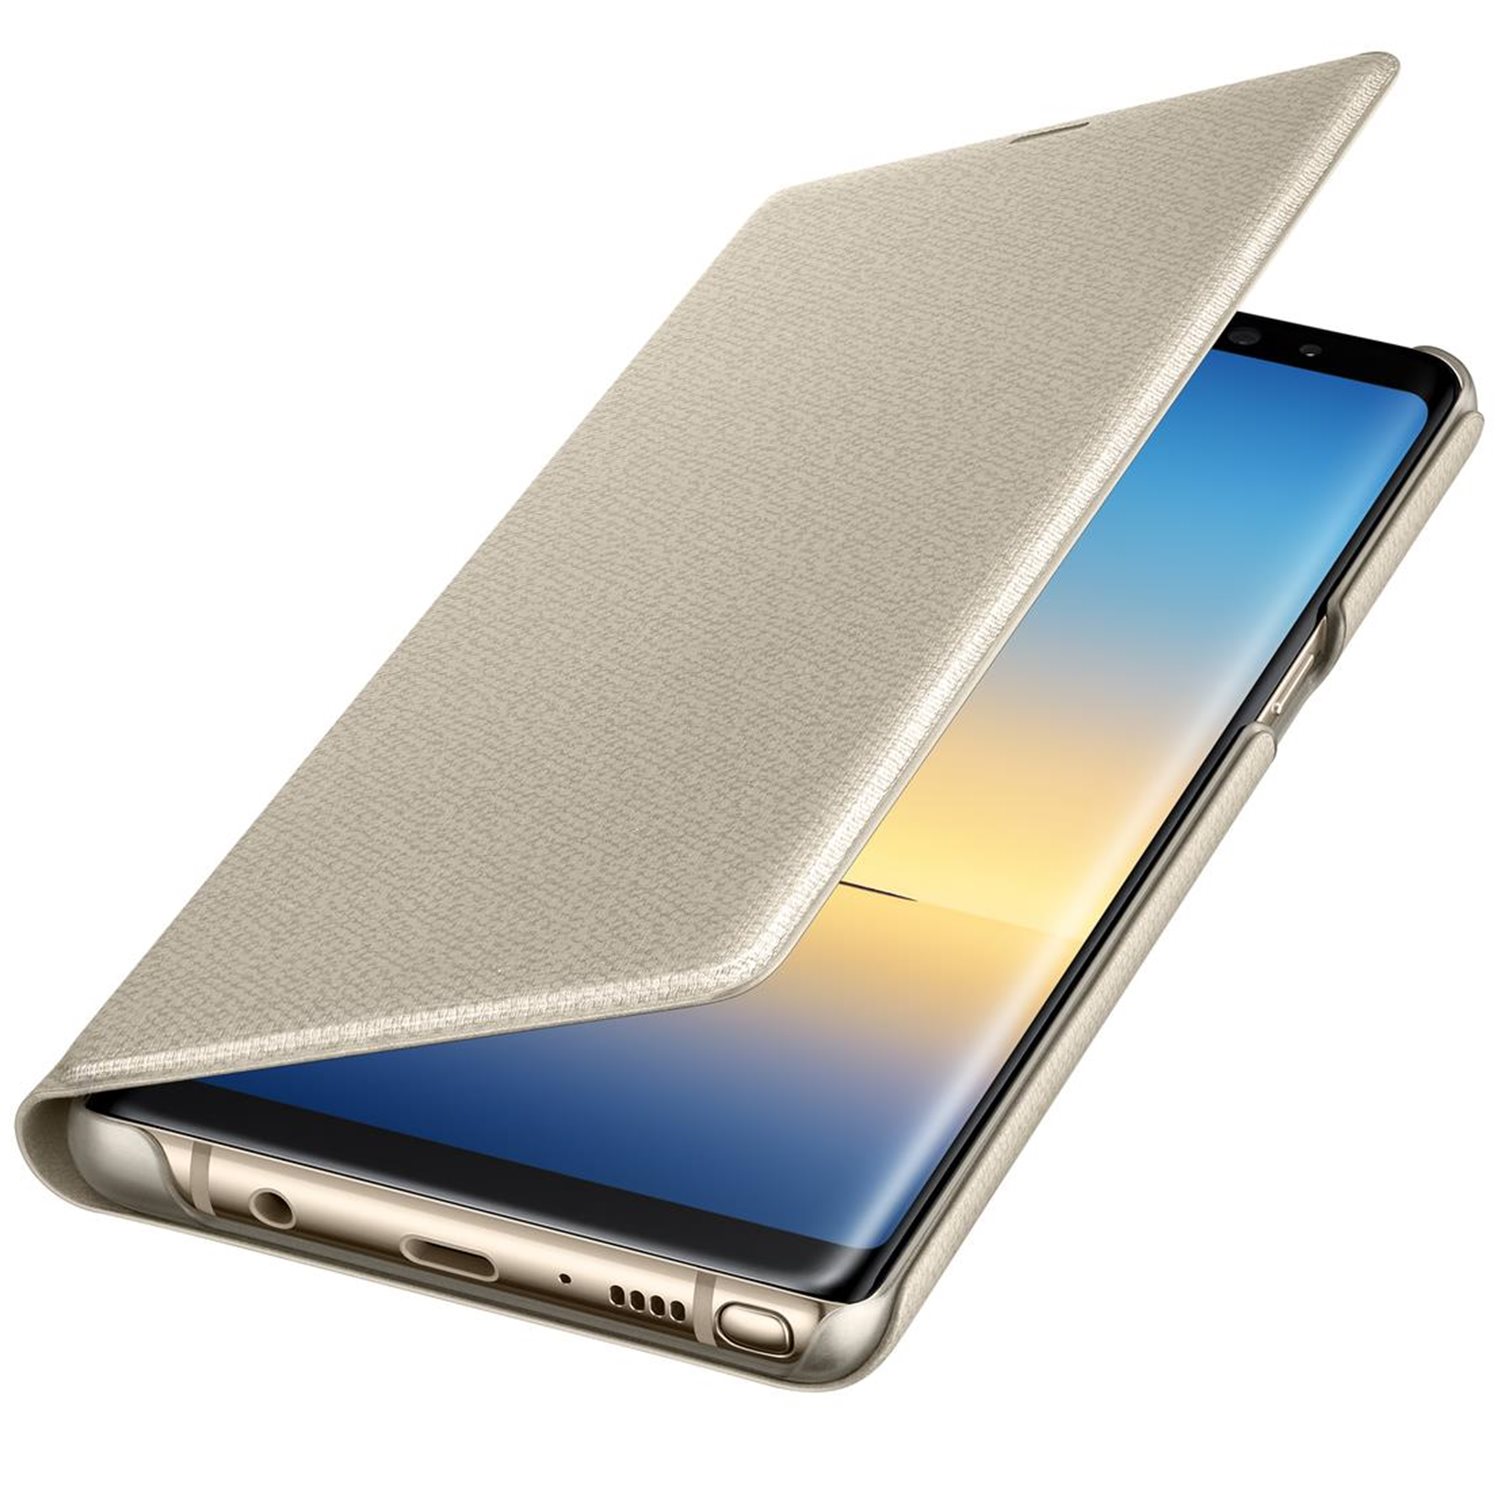 Official Samsung Galaxy Note 8 LED View Cover Case - Gold